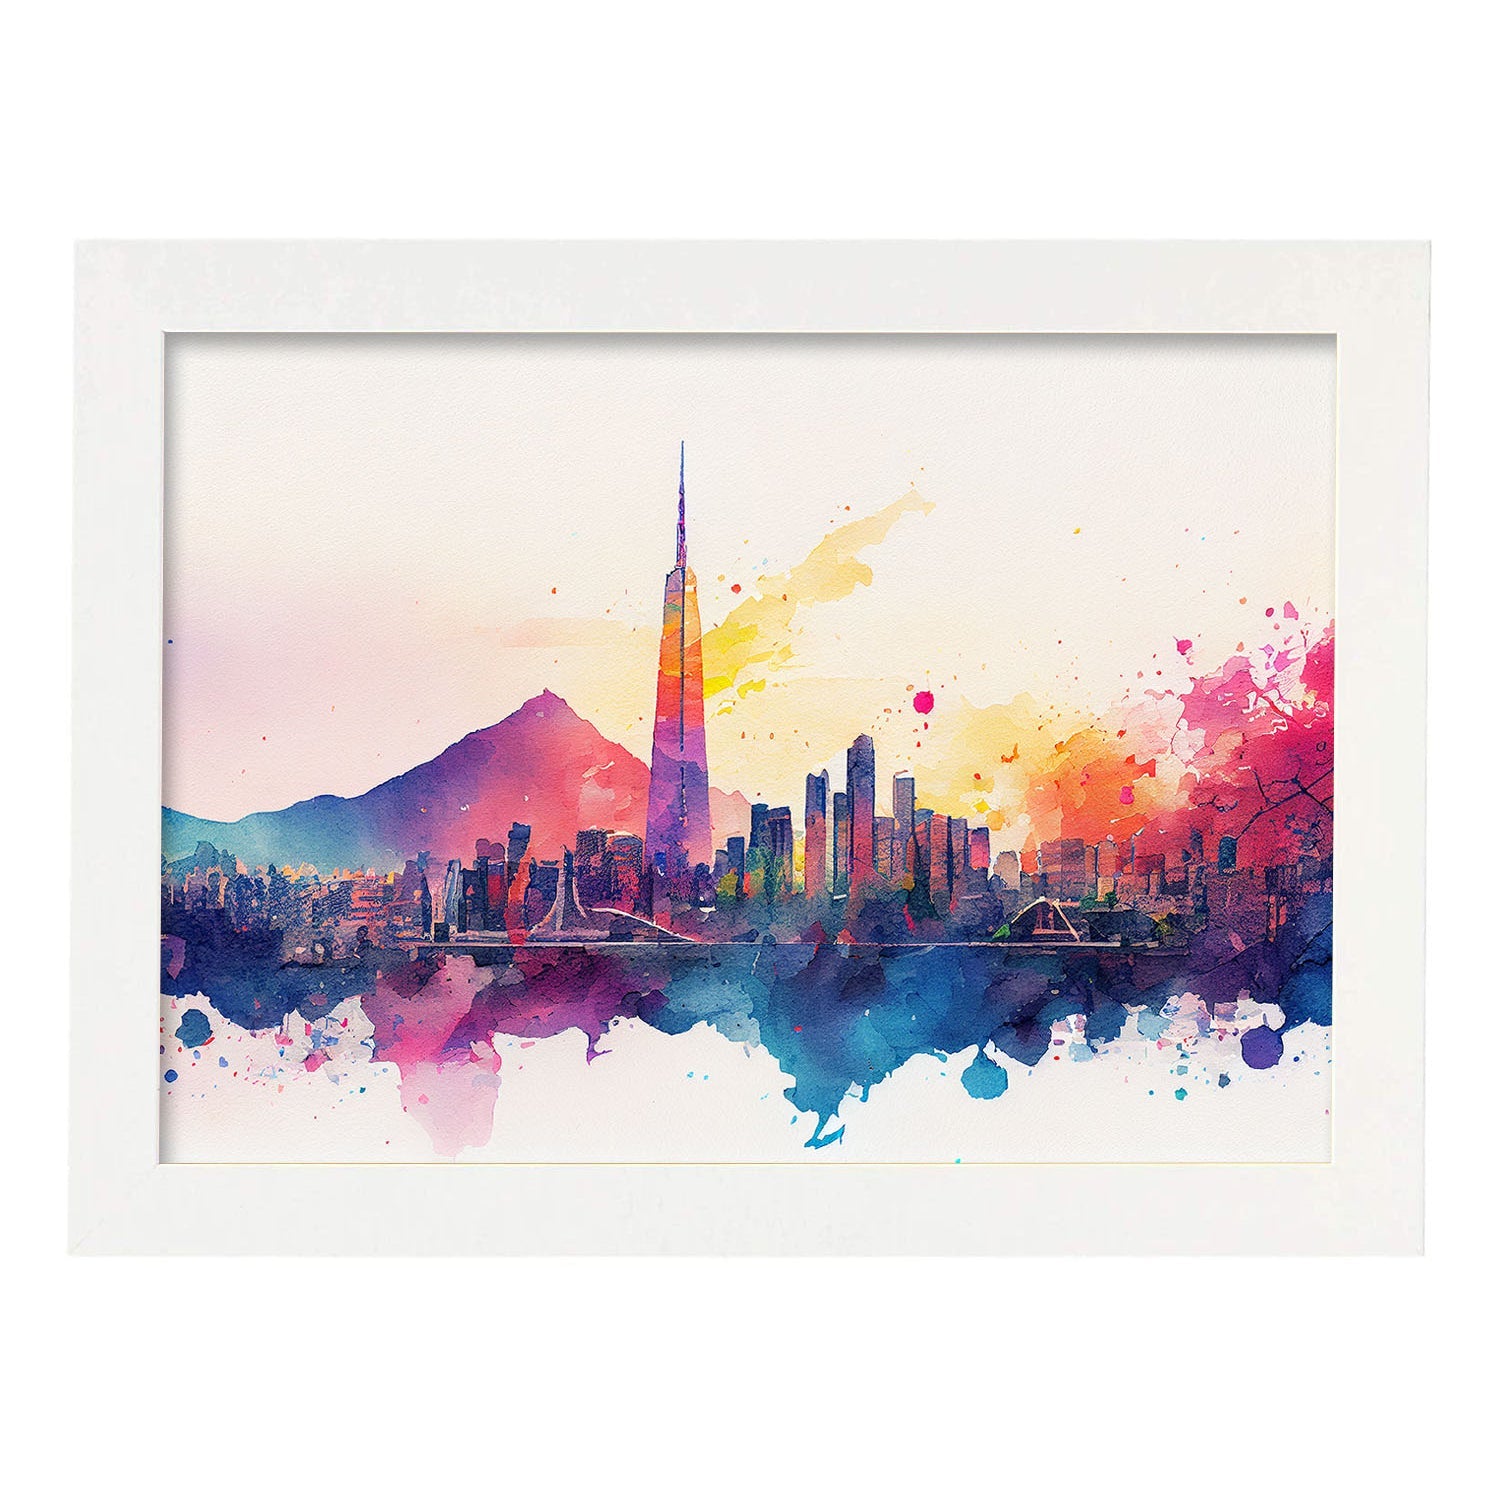 Nacnic watercolor of a skyline of the city of Seoul. Aesthetic Wall Art Prints for Bedroom or Living Room Design.-Artwork-Nacnic-A4-Marco Blanco-Nacnic Estudio SL